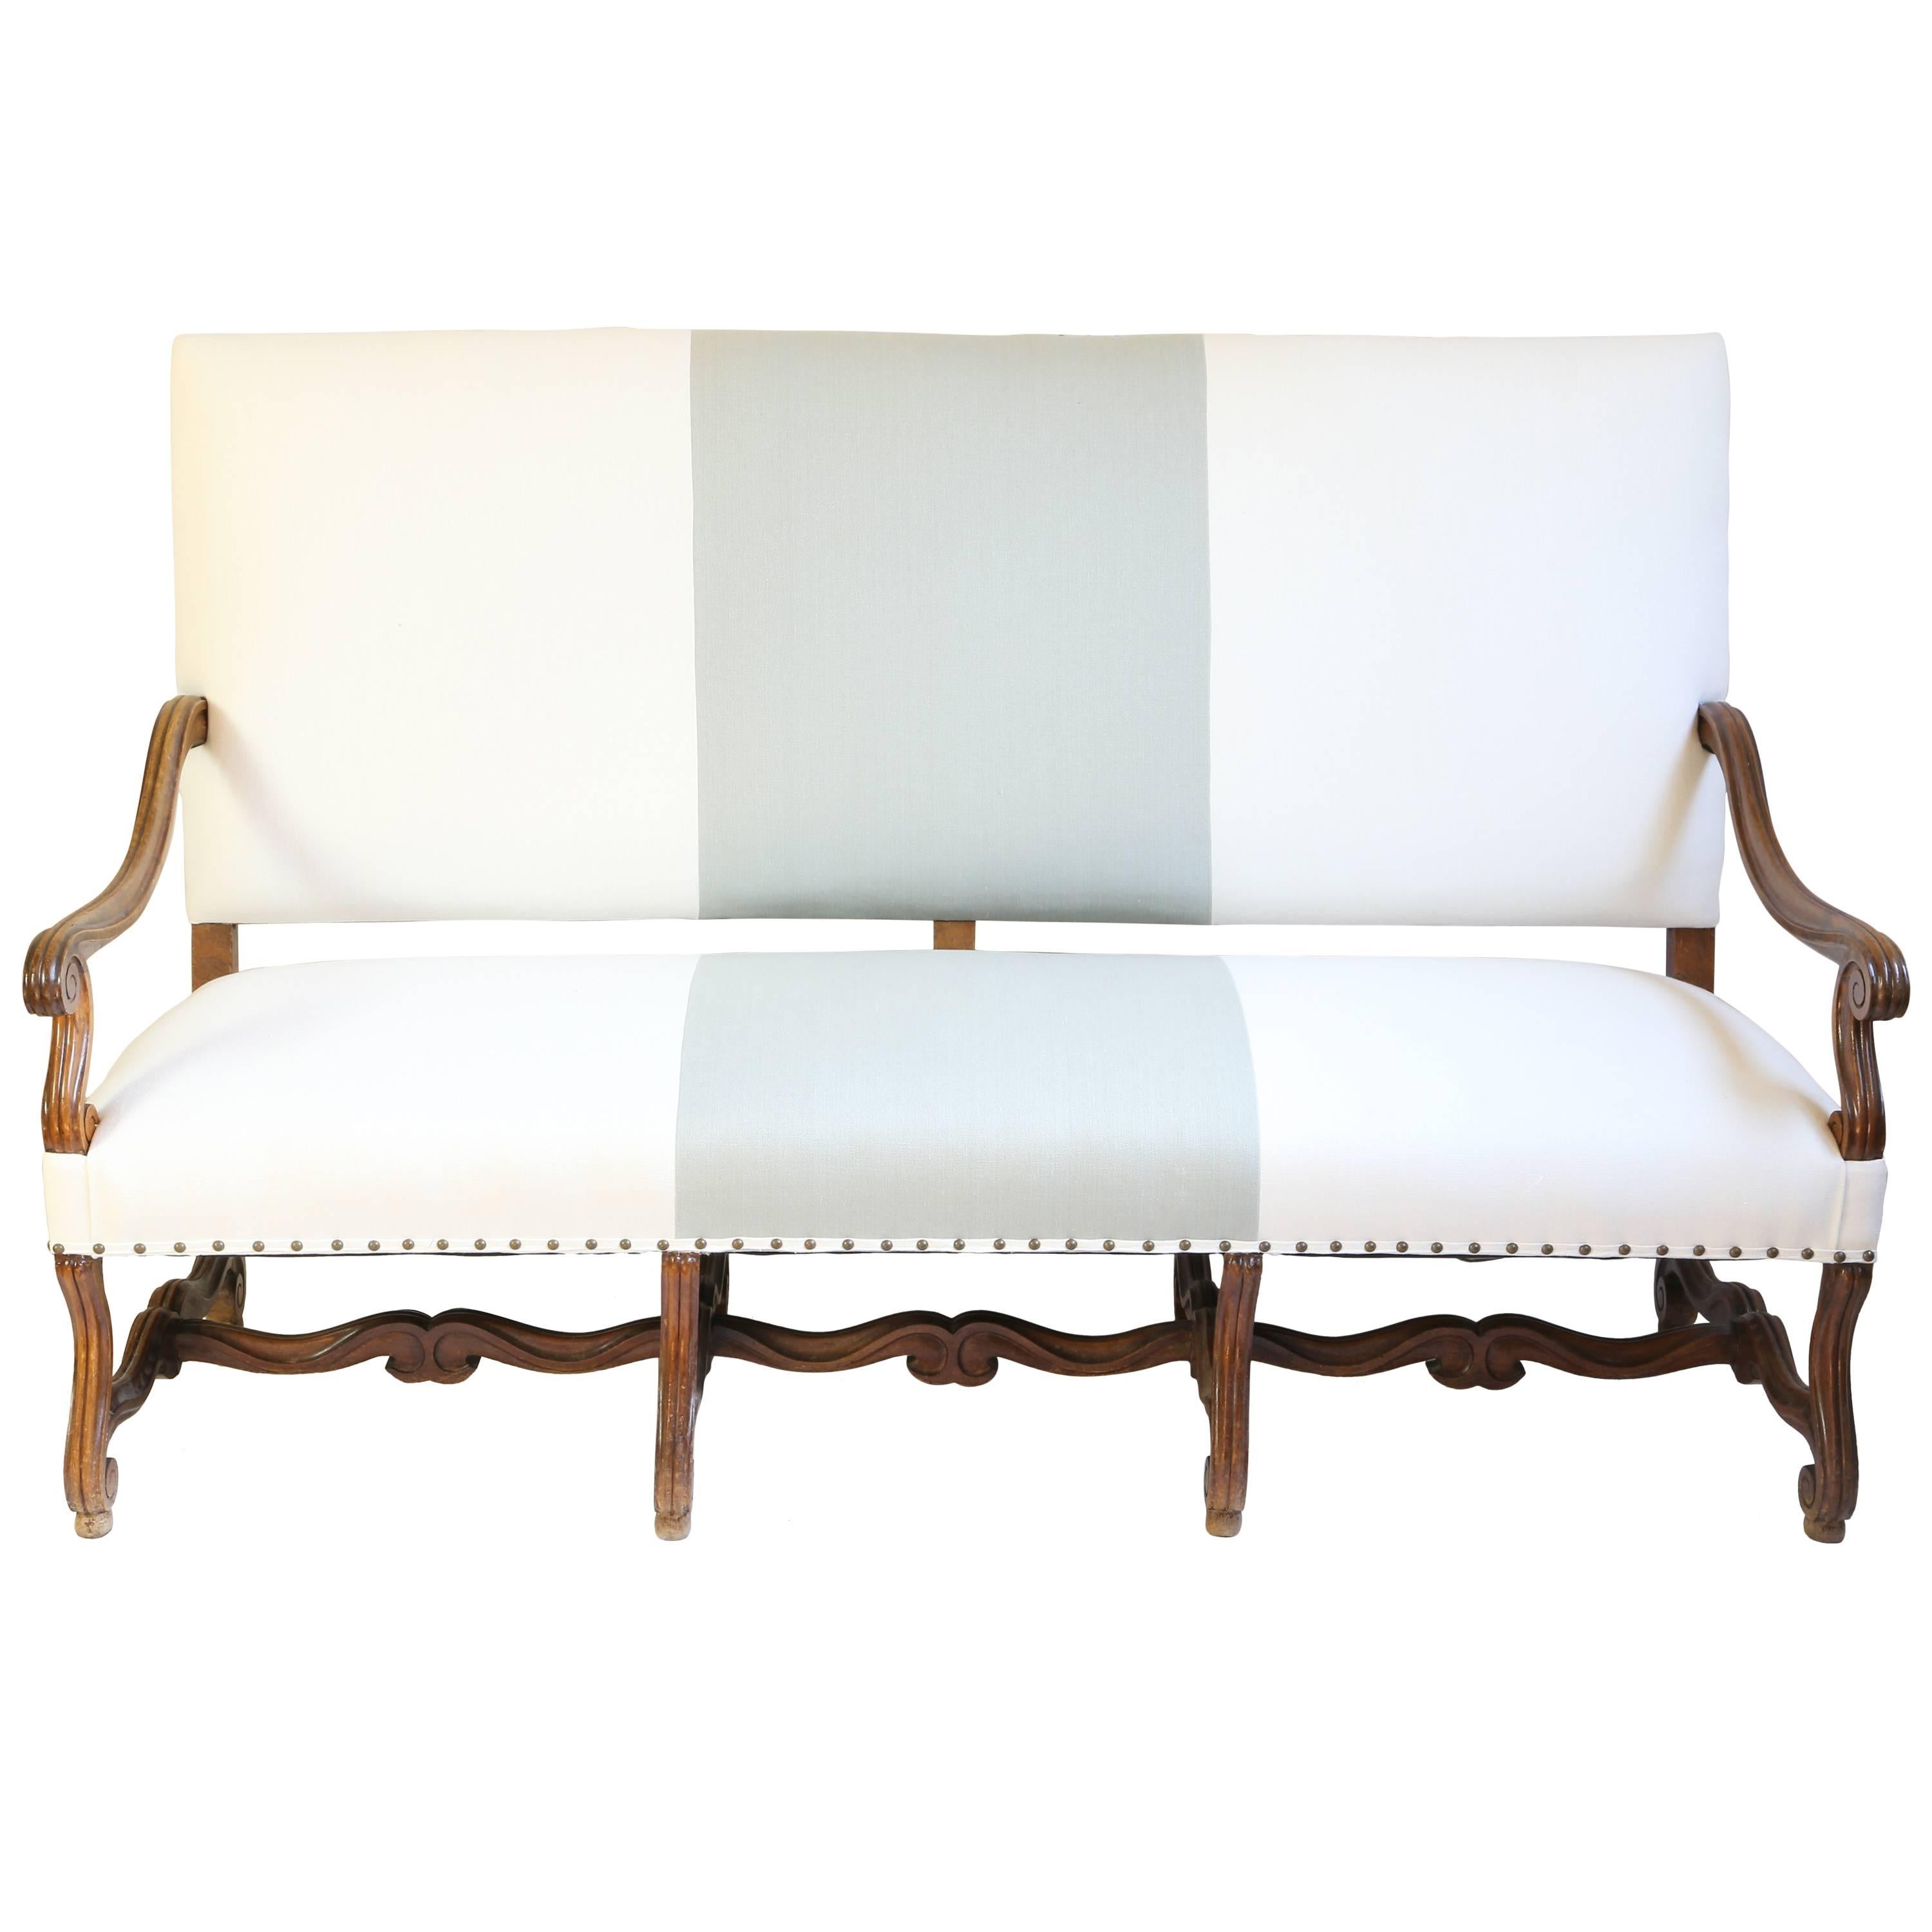 Late 19th Century Louis XIV Style Sofa in Linen